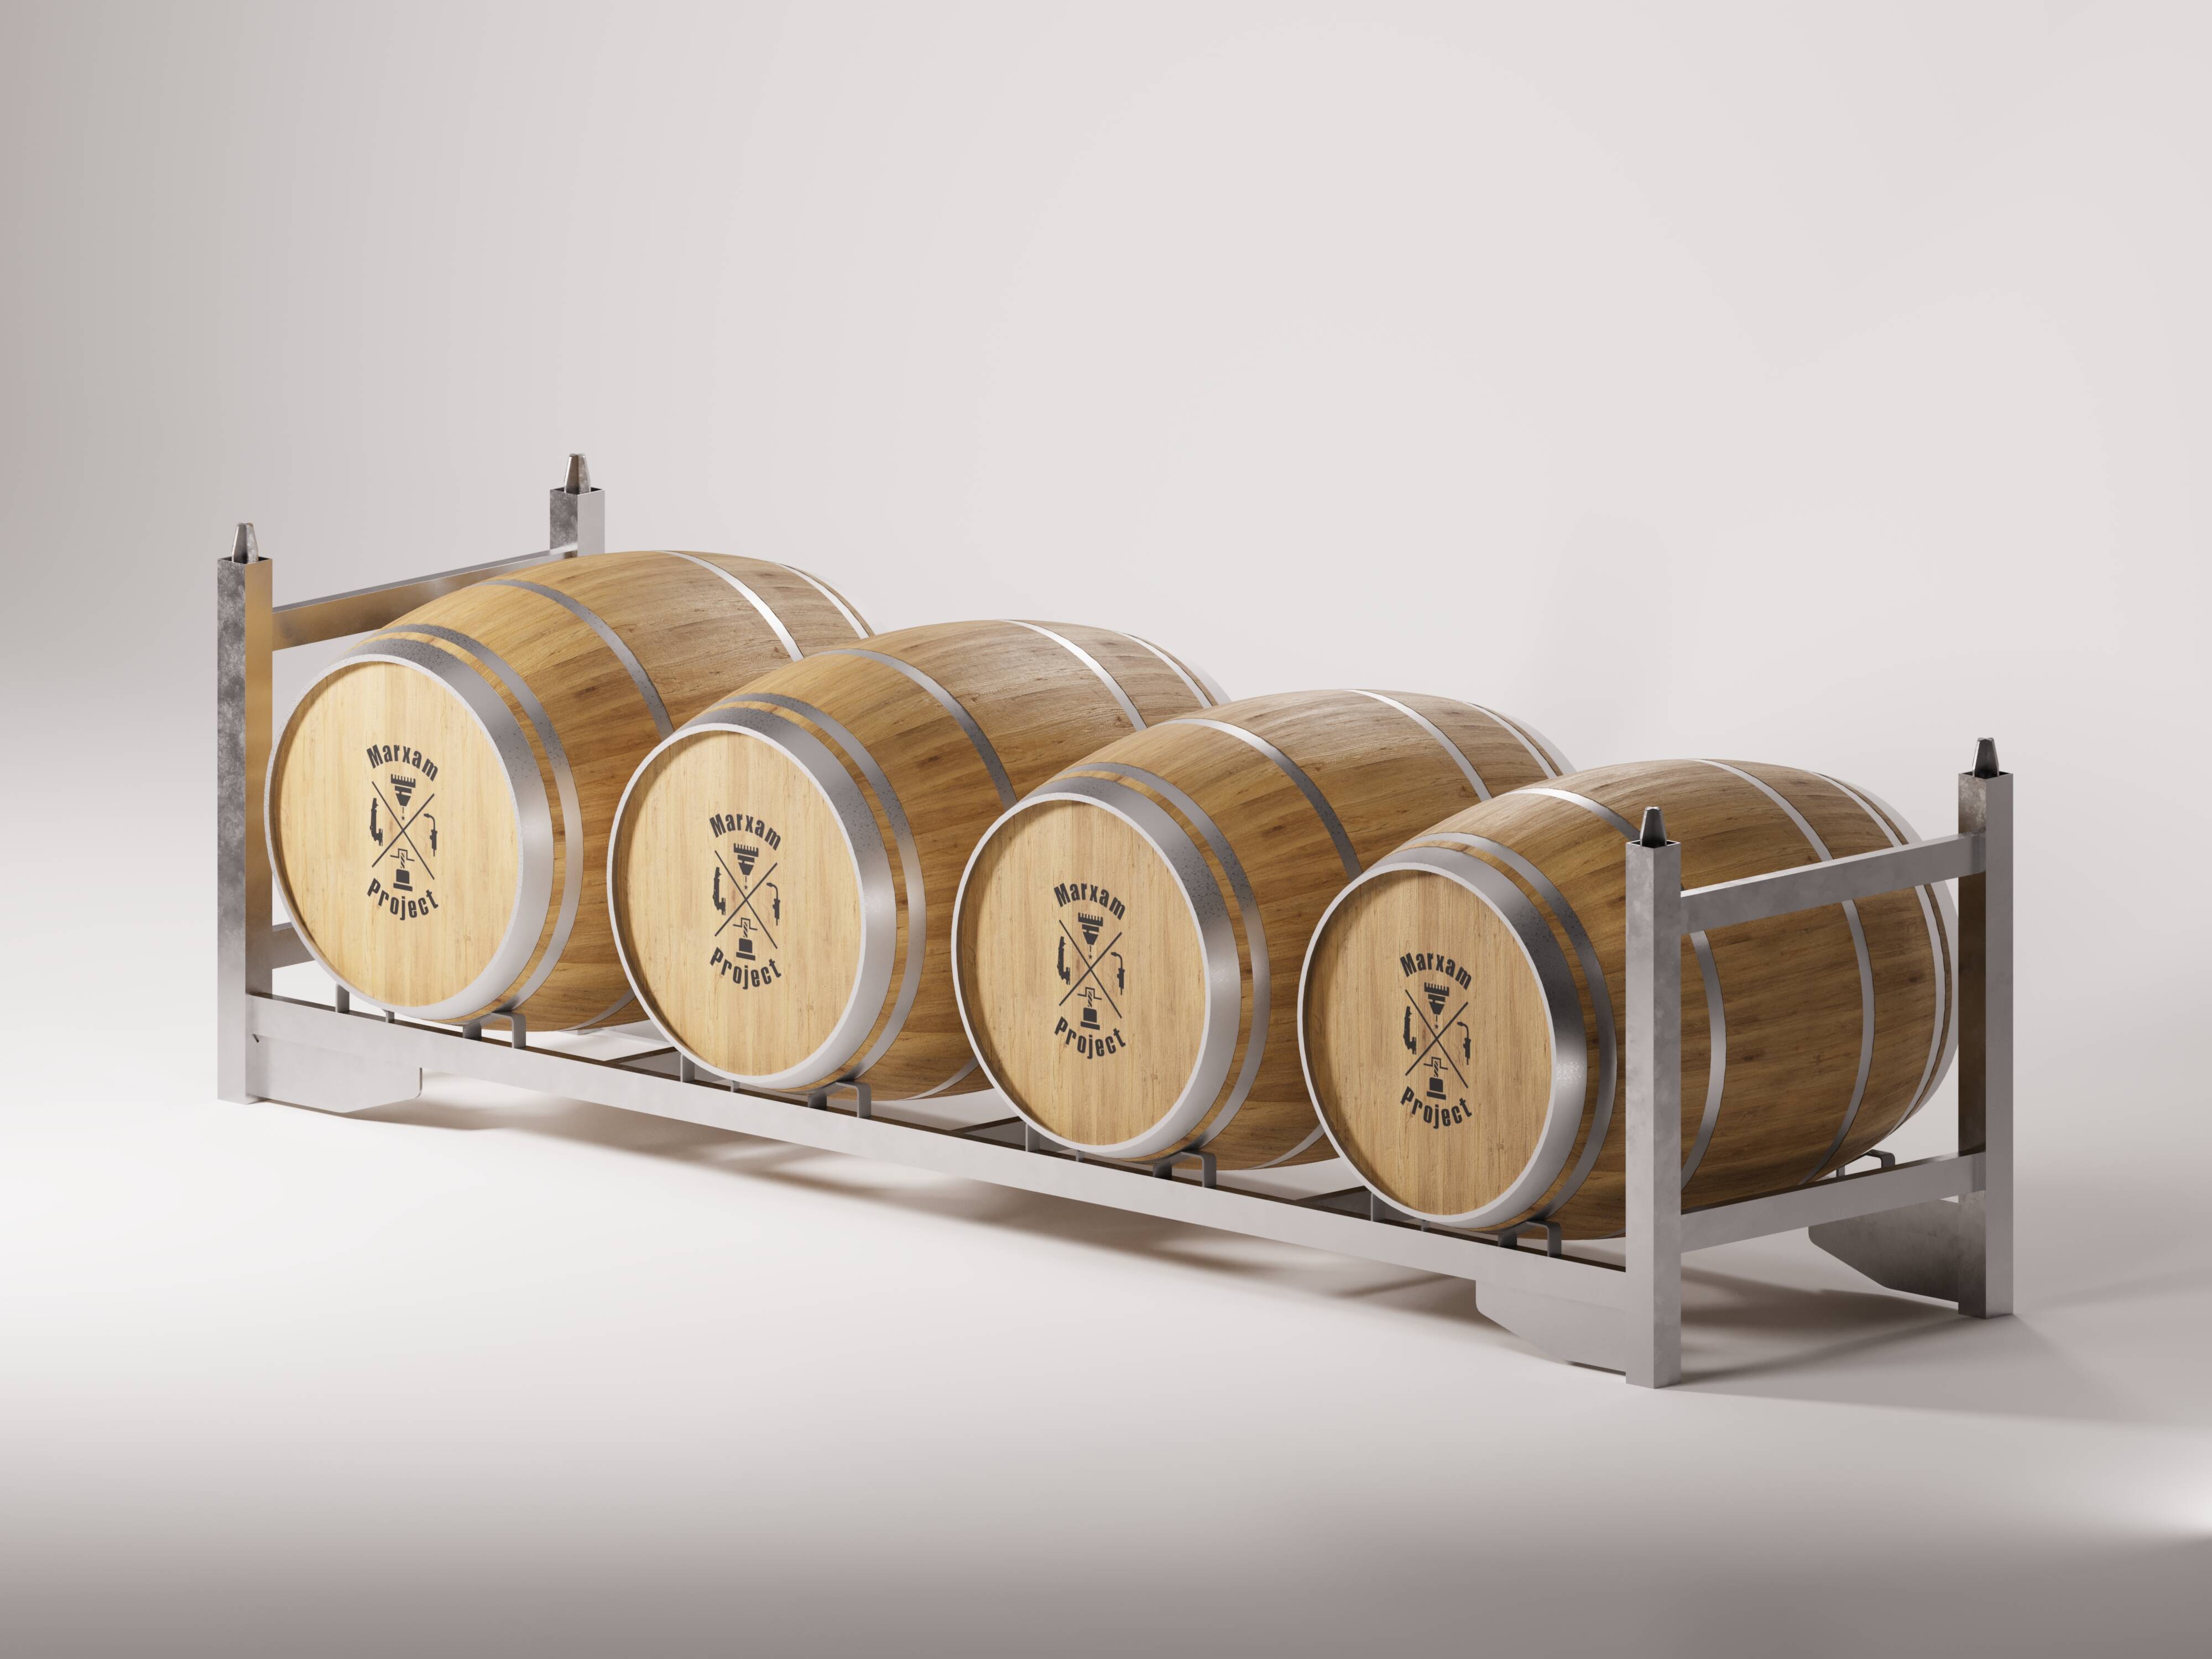 The photograph displays four barrels enclosed in a barrel cage on a metal rack, with the barrels appearing to be in good condition.